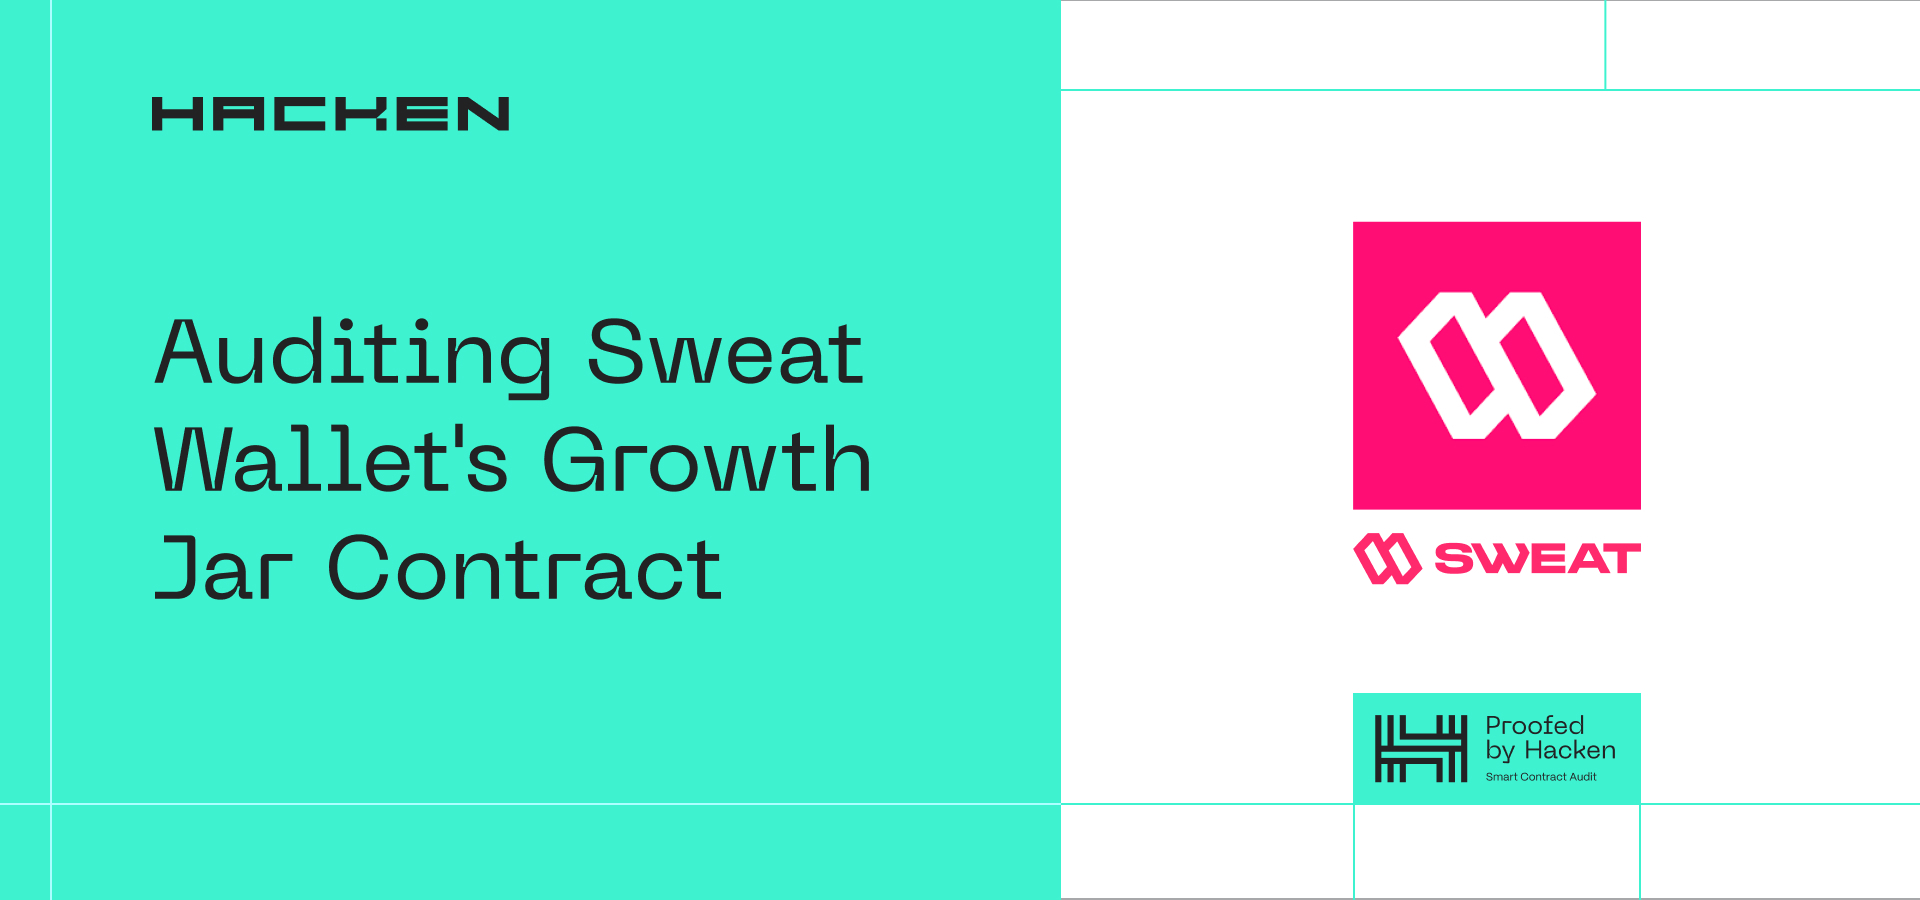 Auditing Sweat Wallet's Growth Jar Contract